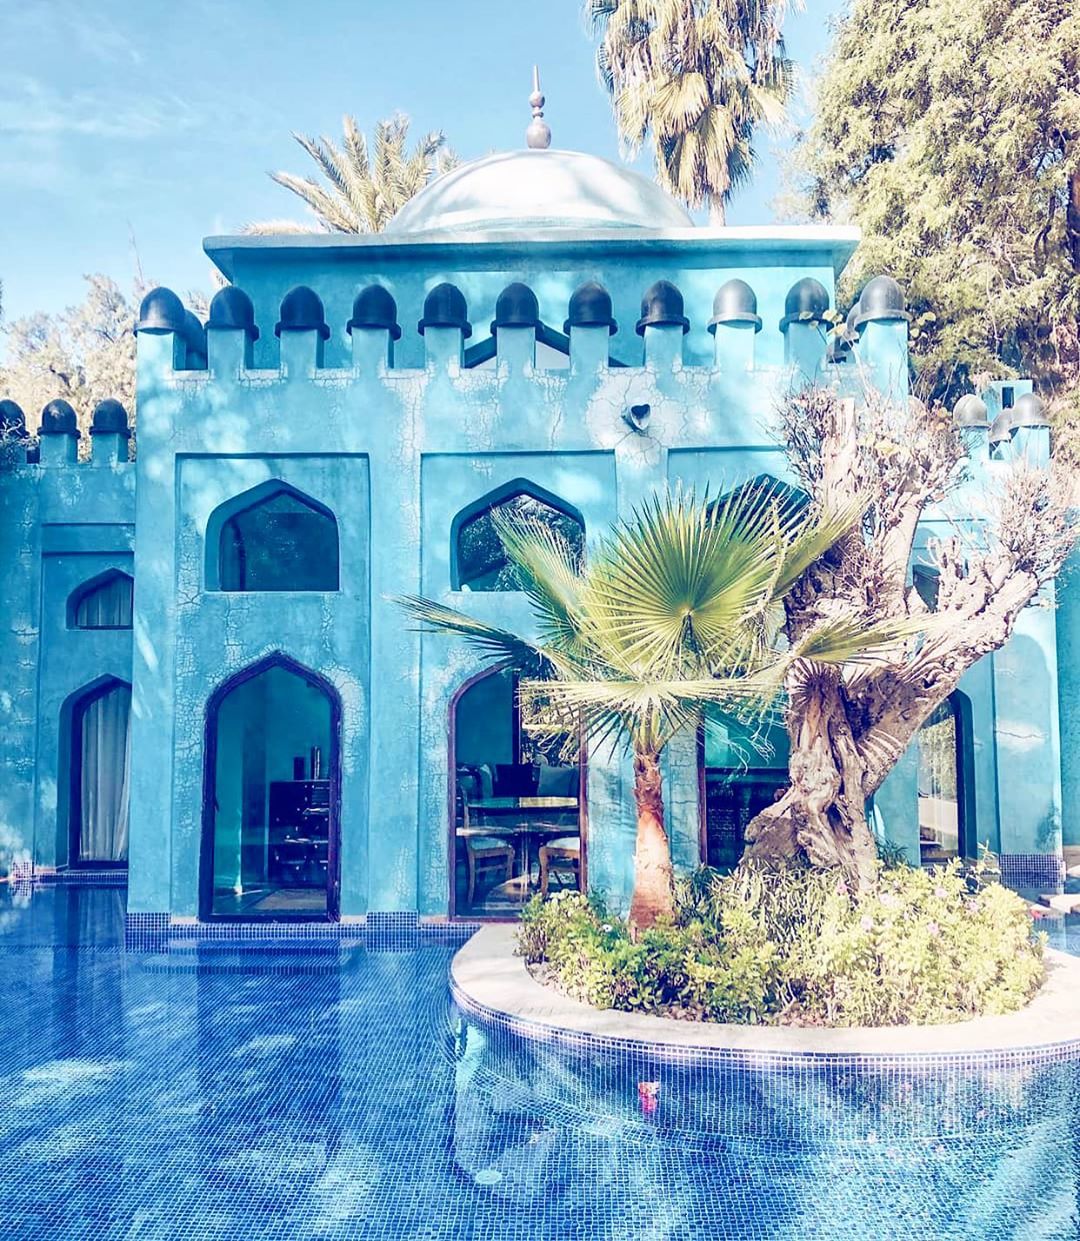 Dreaming of the striking shades of blue at @essaadimarrakech 🌴💙
⁣
#DreamNowGoLater #EsSaadiMarrakech #ArmChairTravel ⁣
⁣
📸 @clm_g